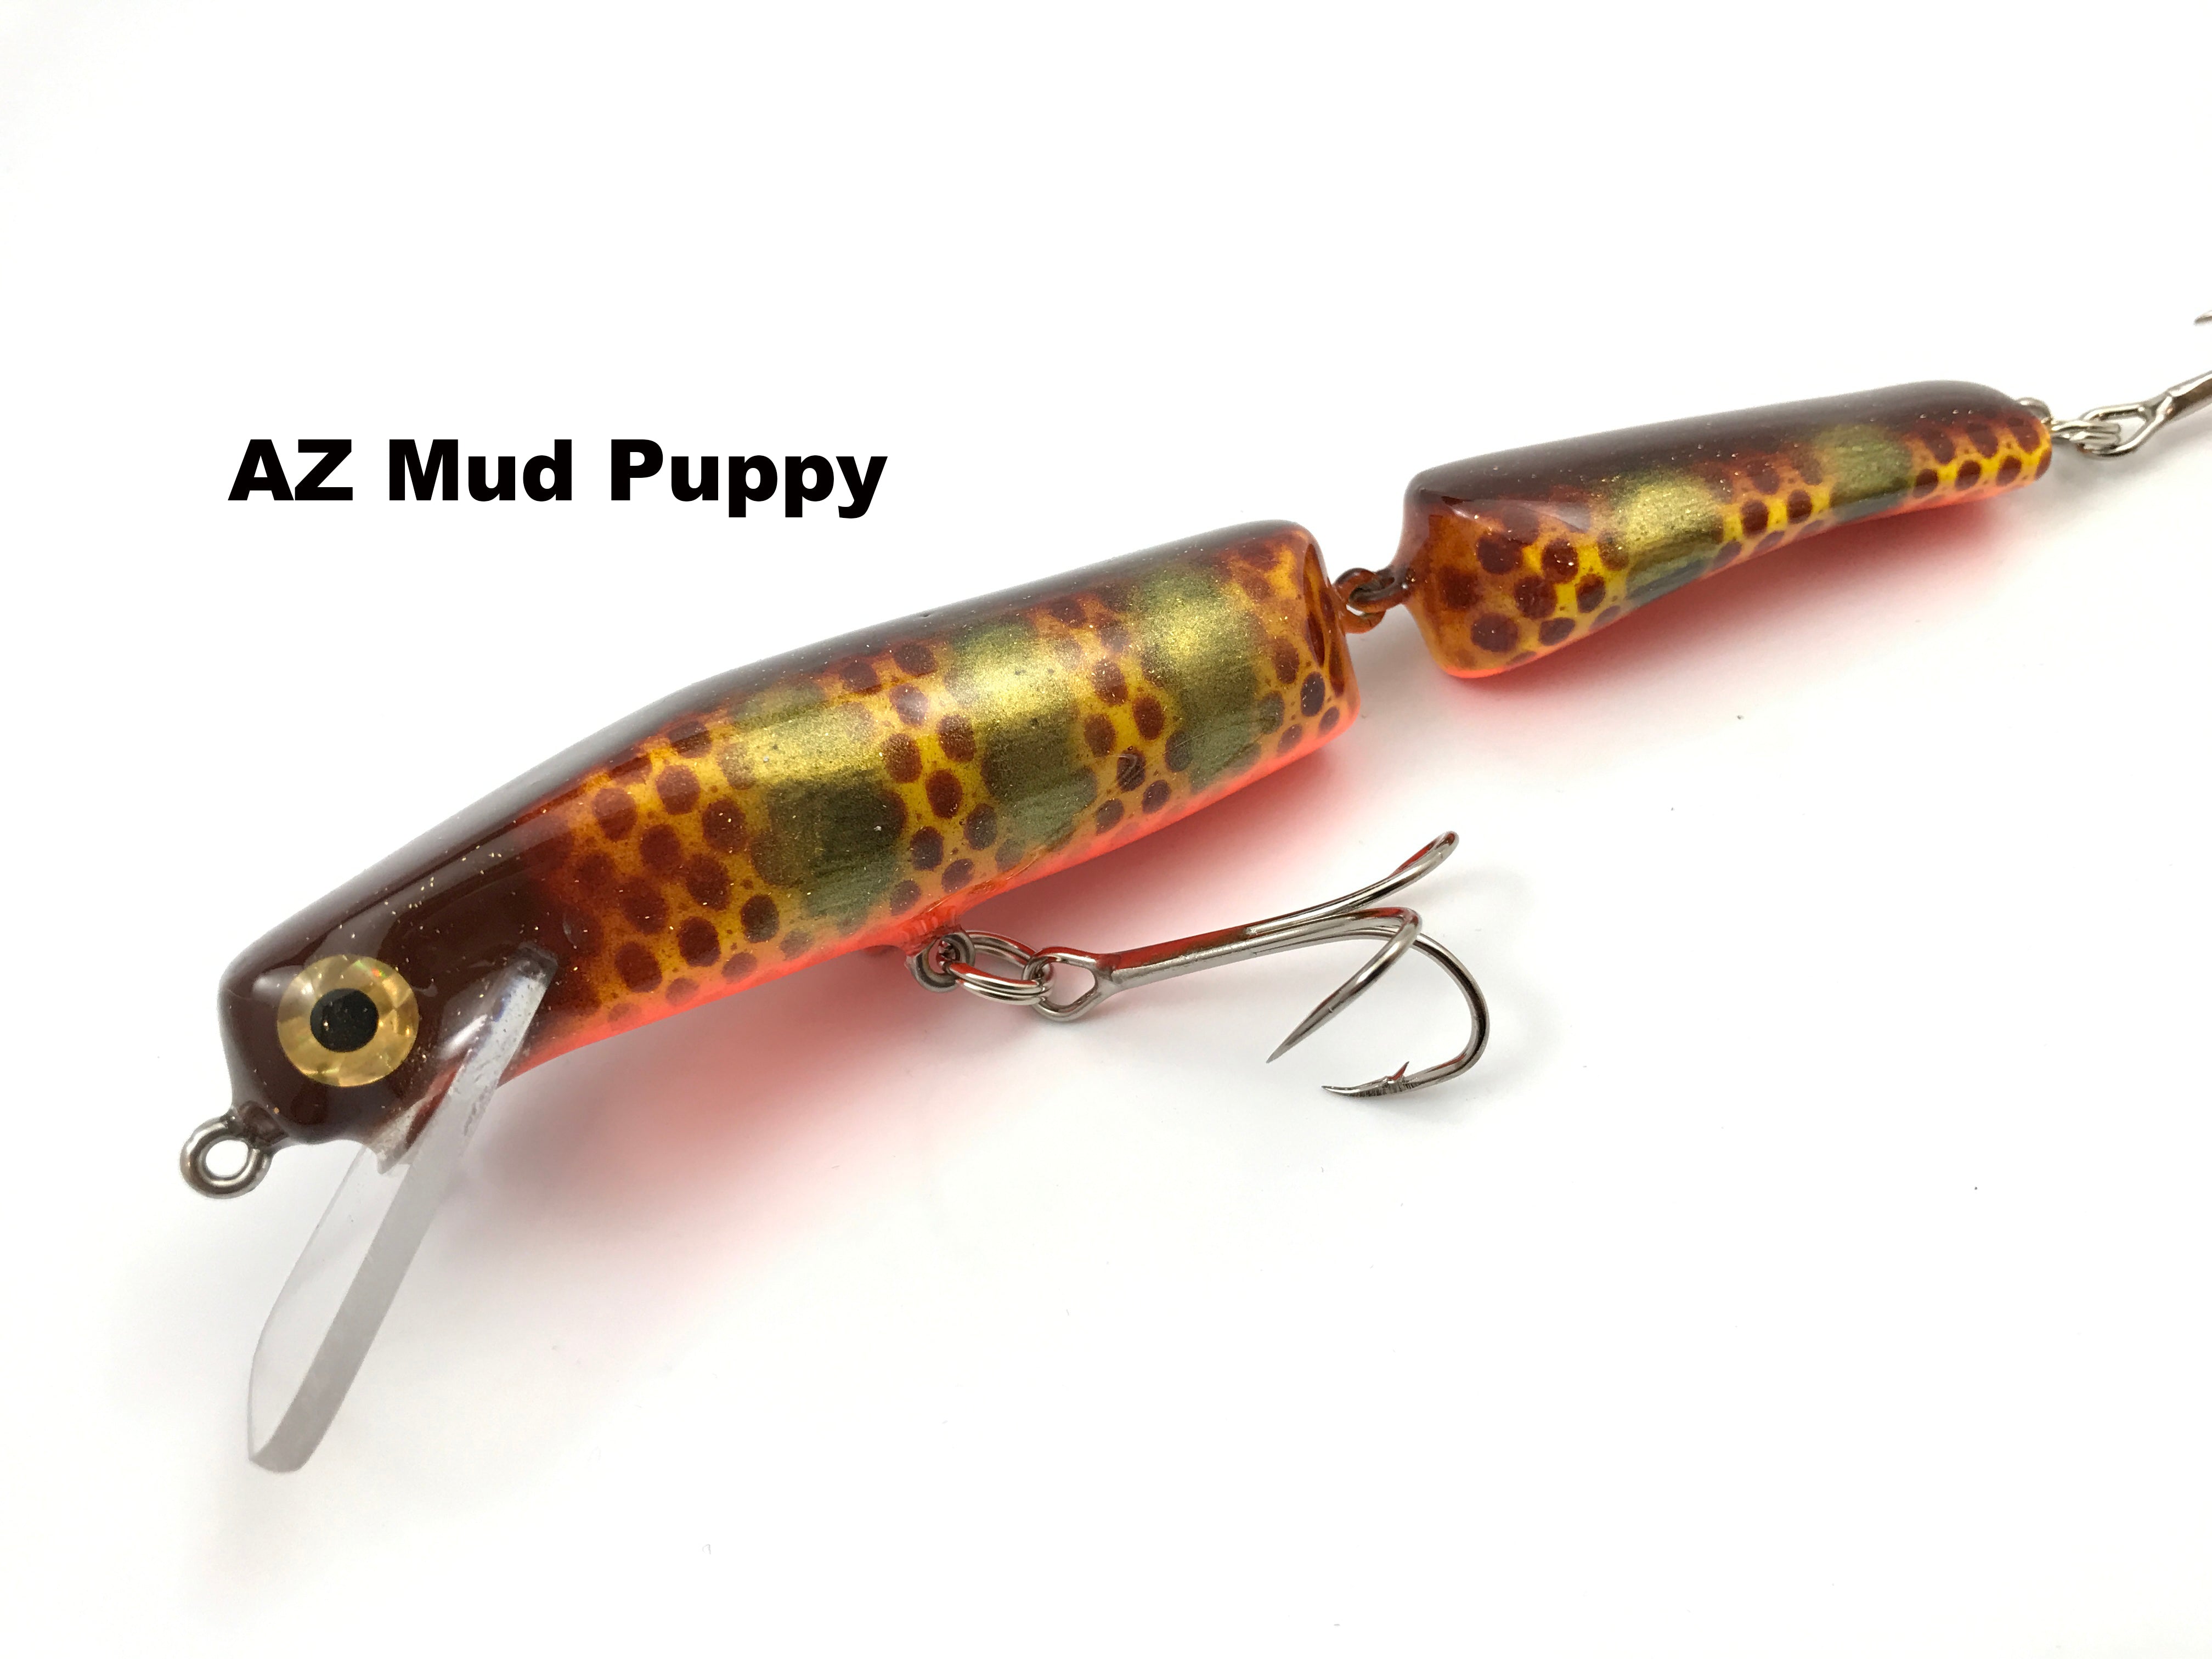 B & N Custom Rod and Tackle  Custom made, hand crafted Talonz crankbaits  and lures for muskie and pike fishing